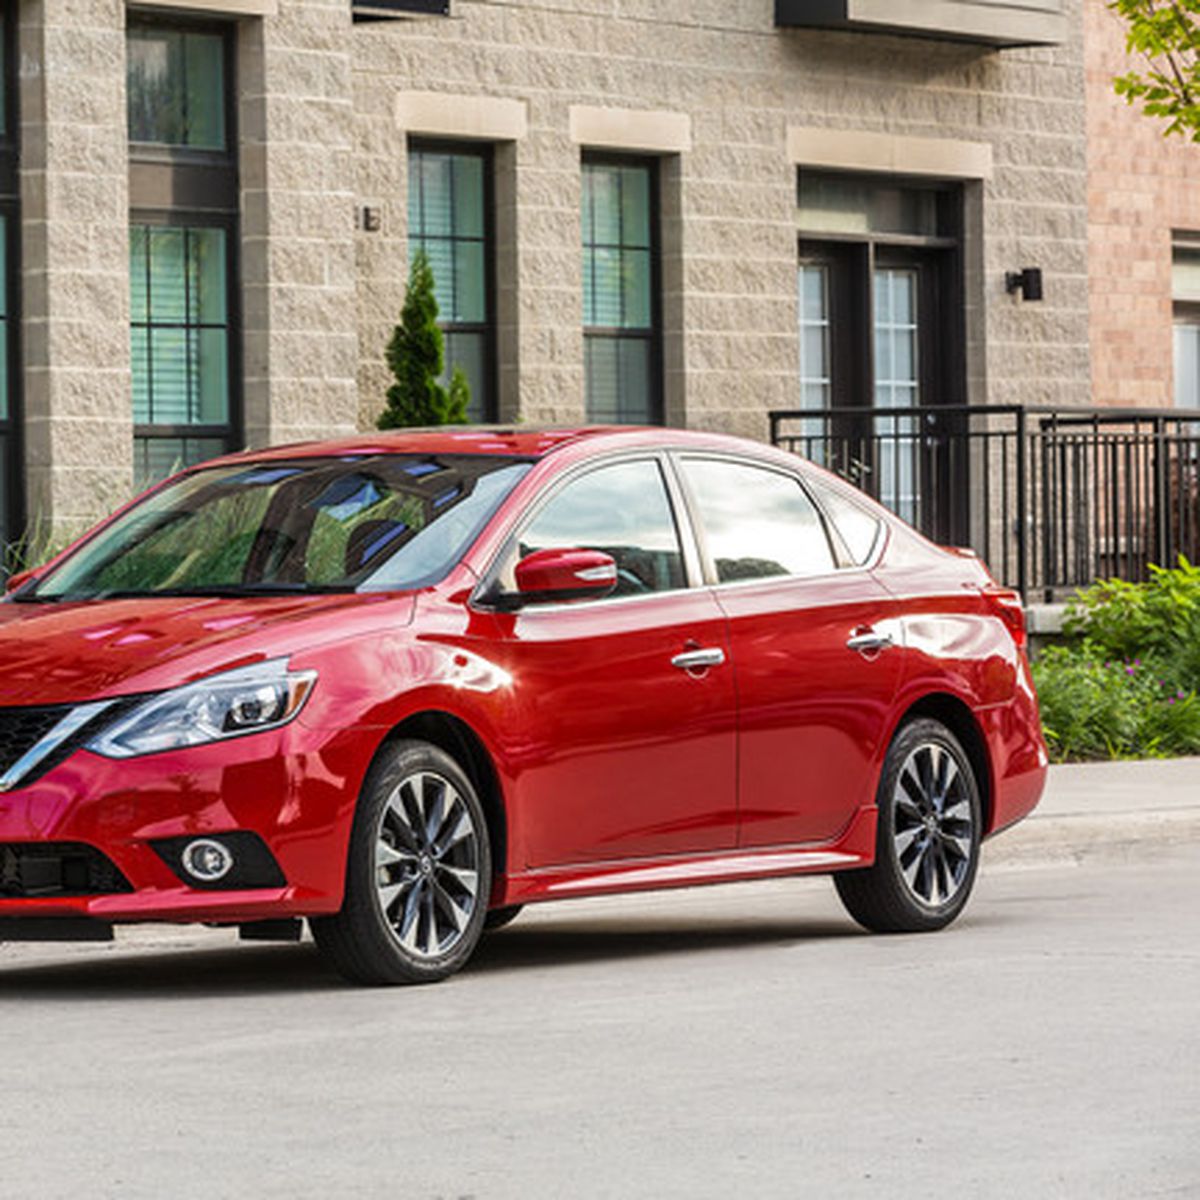 Nissan Sentra Features Carplay Starting With New 19 Model Macrumors